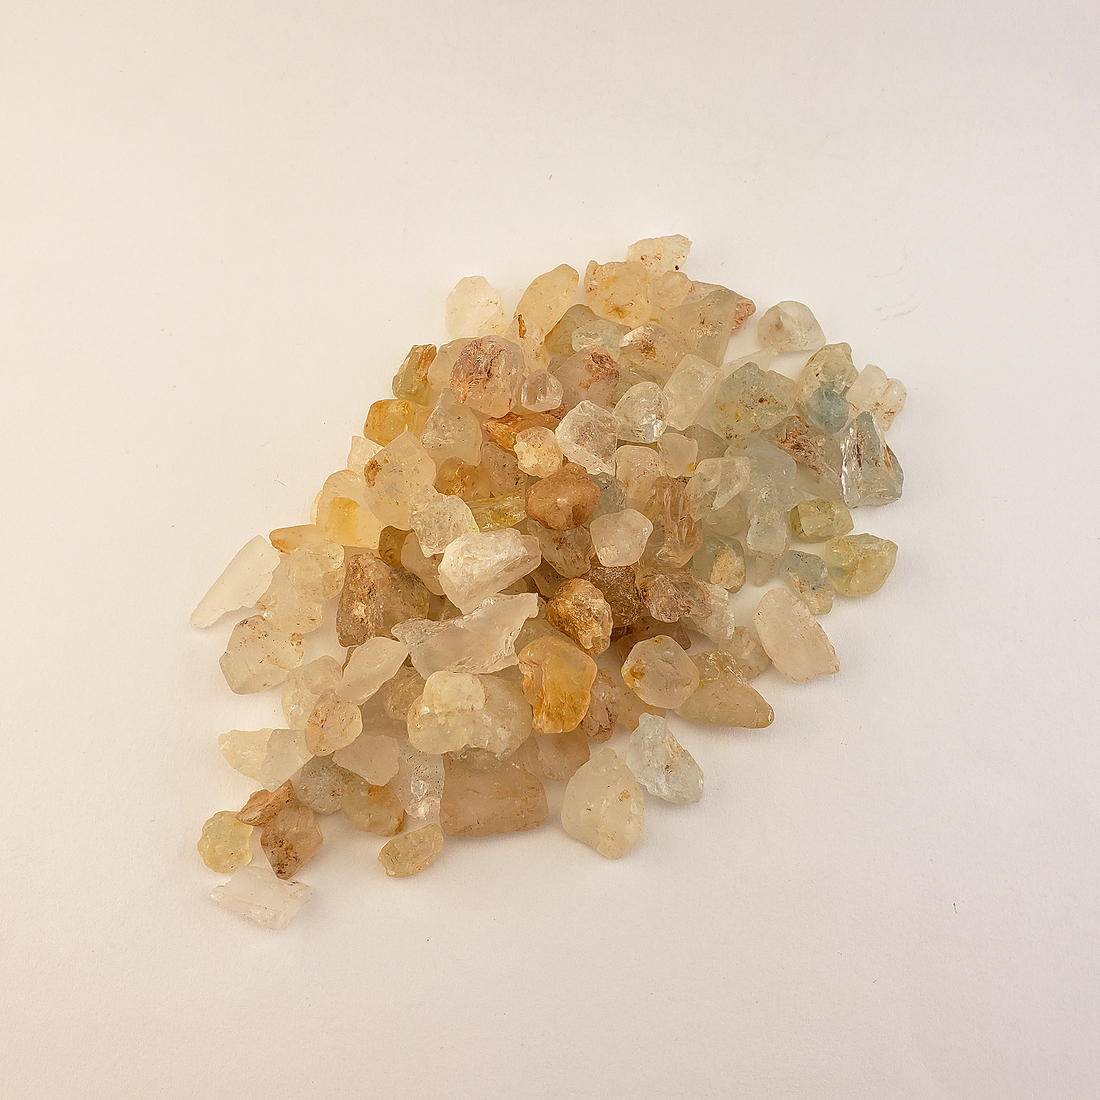 Multi Topaz Raw Crystals Rough Gemstones by the Ounce - White Background 3